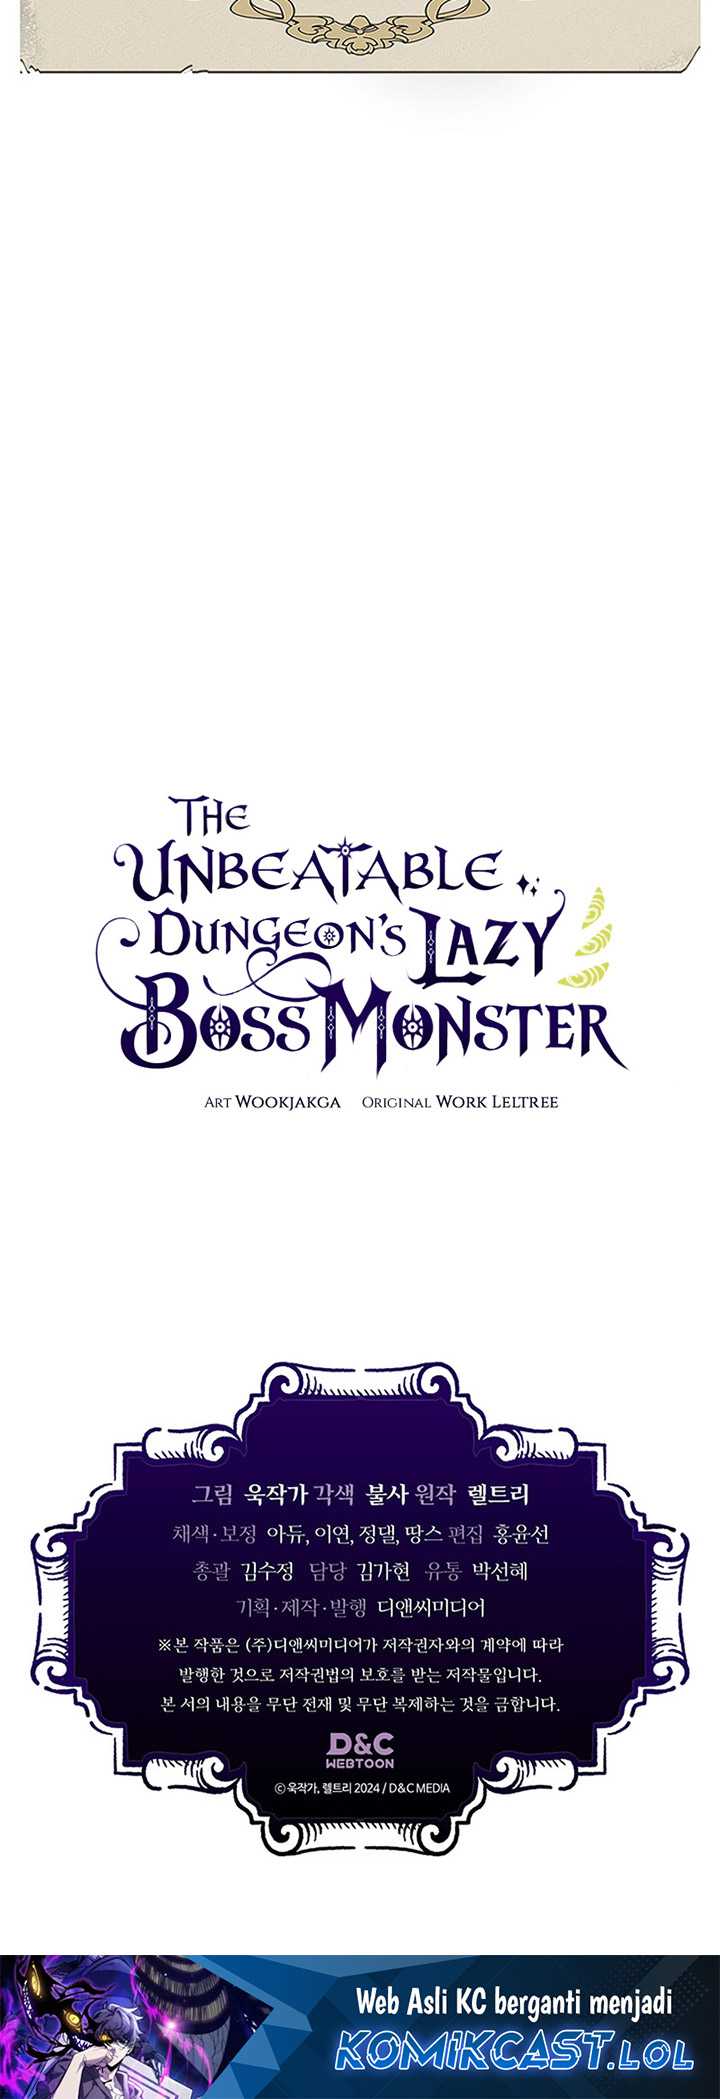 The Unbeatable Dungeon’s Lazy Boss Chapter 08